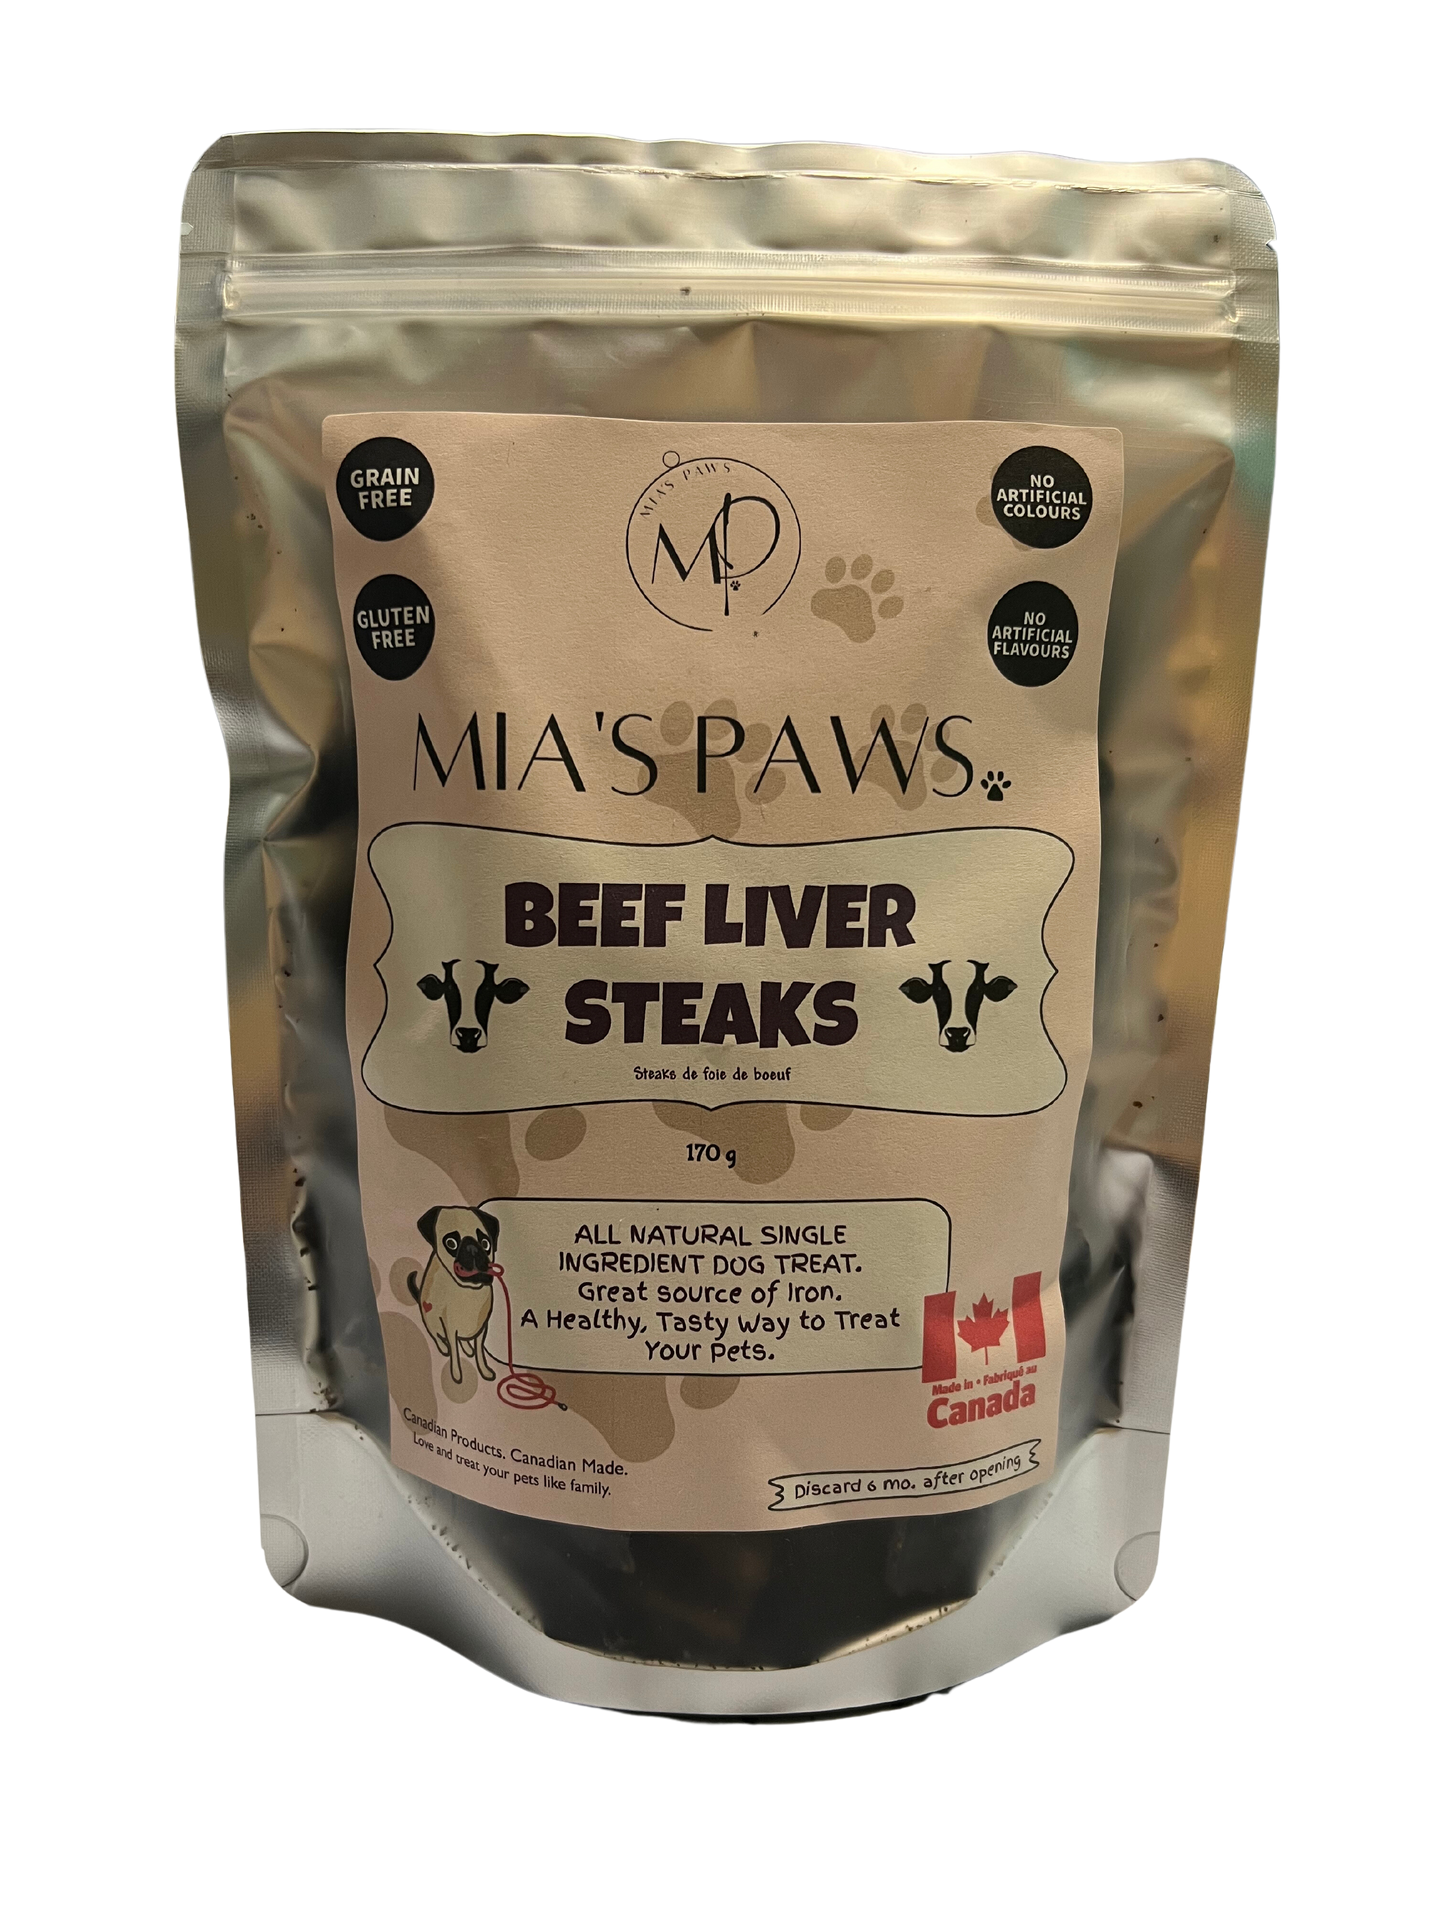 Baked Beef Liver Steaks - Mia's Paws